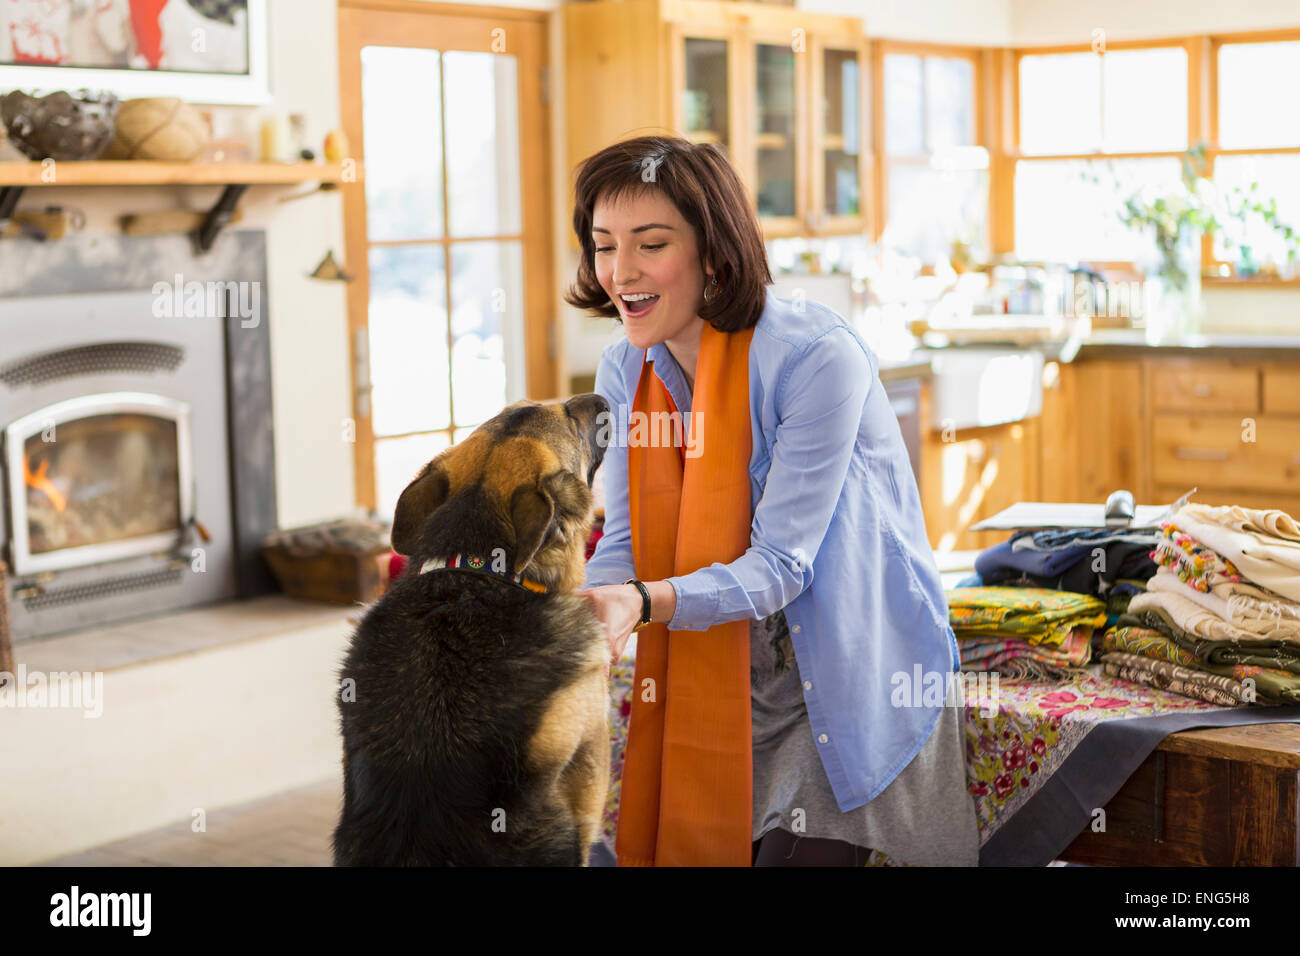 Hispanic woman petting dog in kitchen Banque D'Images